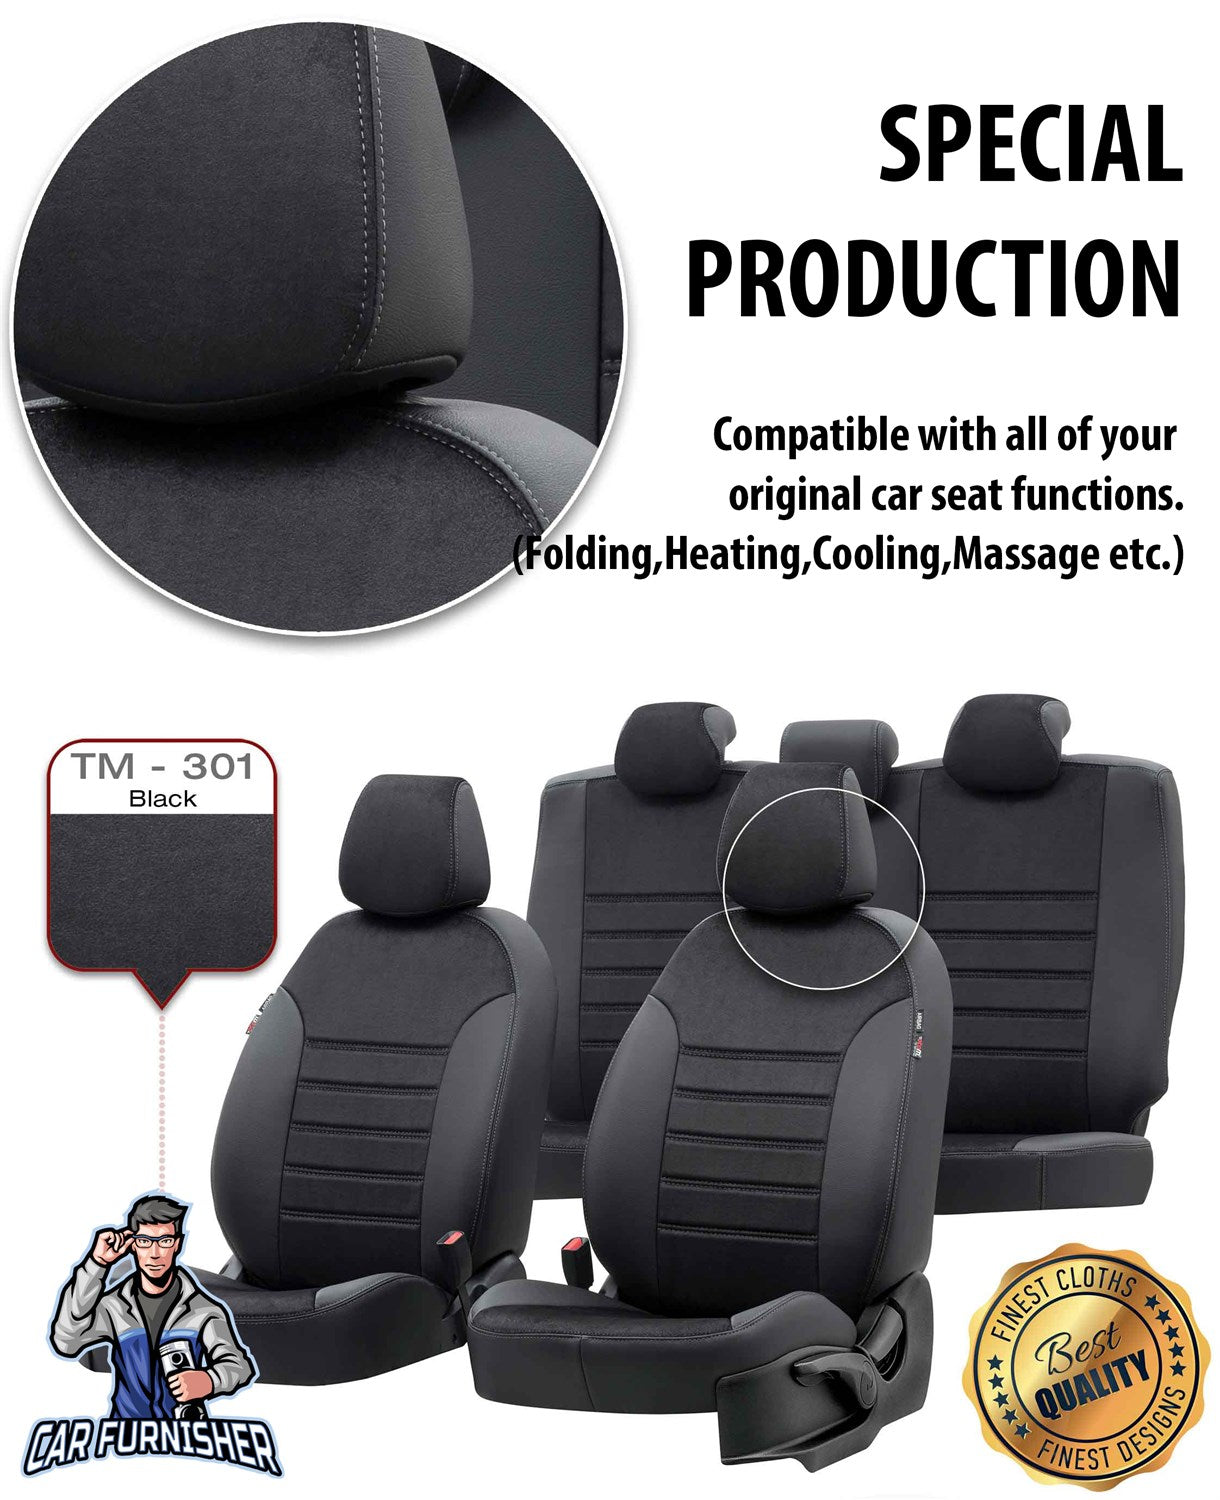 Peugeot 107 Seat Covers Milano Suede Design Smoked Black Leather & Suede Fabric